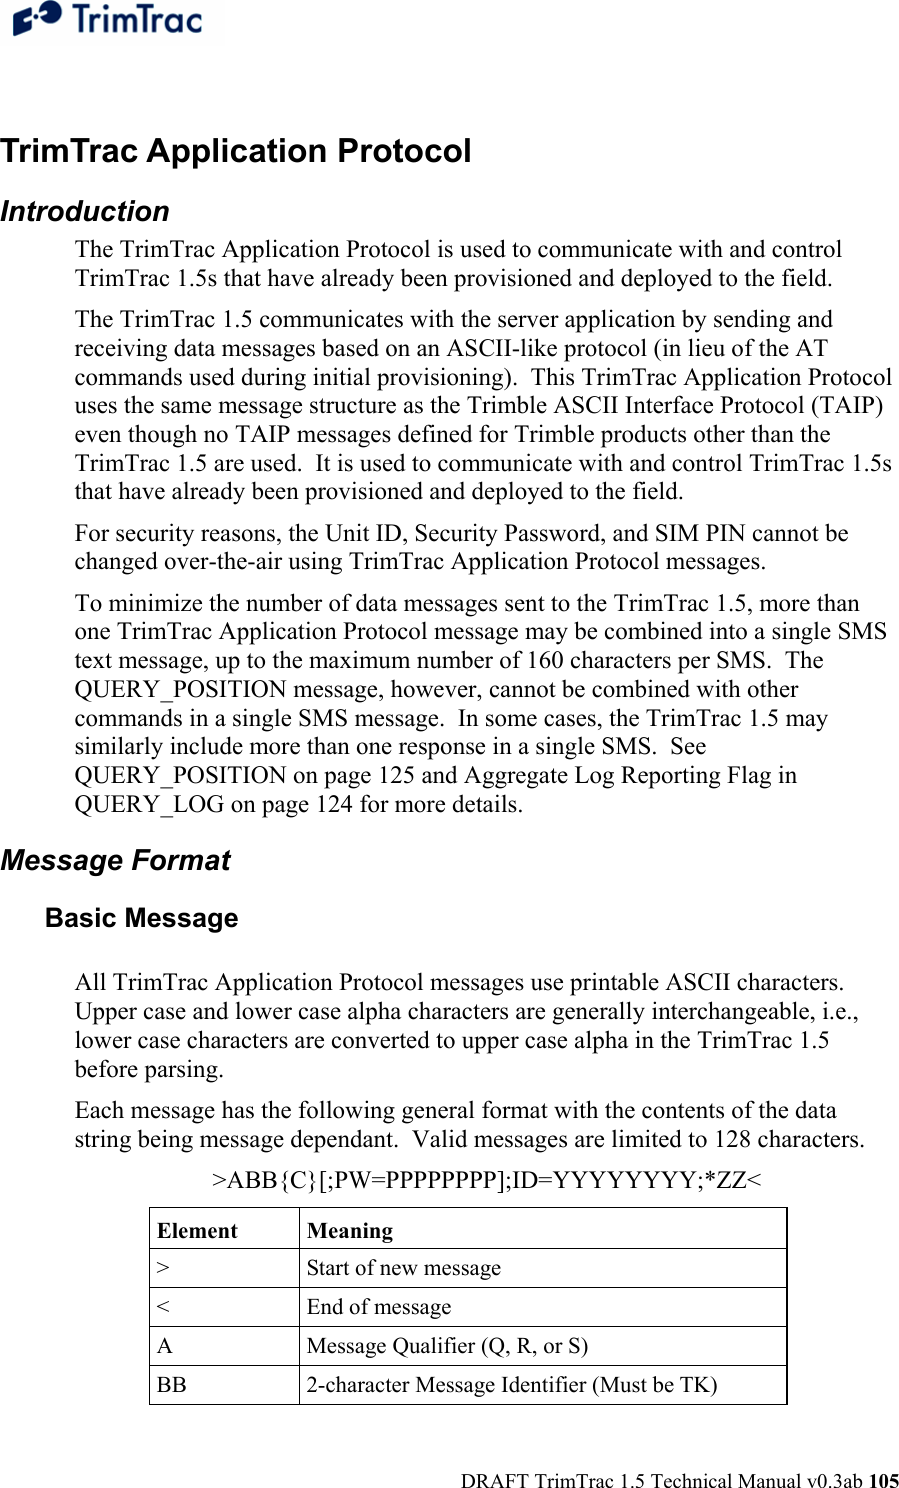  DRAFT TrimTrac 1.5 Technical Manual v0.3ab 105  TrimTrac Application Protocol Introduction The TrimTrac Application Protocol is used to communicate with and control TrimTrac 1.5s that have already been provisioned and deployed to the field. The TrimTrac 1.5 communicates with the server application by sending and receiving data messages based on an ASCII-like protocol (in lieu of the AT commands used during initial provisioning).  This TrimTrac Application Protocol uses the same message structure as the Trimble ASCII Interface Protocol (TAIP) even though no TAIP messages defined for Trimble products other than the TrimTrac 1.5 are used.  It is used to communicate with and control TrimTrac 1.5s that have already been provisioned and deployed to the field. For security reasons, the Unit ID, Security Password, and SIM PIN cannot be changed over-the-air using TrimTrac Application Protocol messages. To minimize the number of data messages sent to the TrimTrac 1.5, more than one TrimTrac Application Protocol message may be combined into a single SMS text message, up to the maximum number of 160 characters per SMS.  The QUERY_POSITION message, however, cannot be combined with other commands in a single SMS message.  In some cases, the TrimTrac 1.5 may similarly include more than one response in a single SMS.  See QUERY_POSITION on page 125 and Aggregate Log Reporting Flag in QUERY_LOG on page 124 for more details. Message Format Basic Message  All TrimTrac Application Protocol messages use printable ASCII characters. Upper case and lower case alpha characters are generally interchangeable, i.e., lower case characters are converted to upper case alpha in the TrimTrac 1.5 before parsing.  Each message has the following general format with the contents of the data string being message dependant.  Valid messages are limited to 128 characters. &gt;ABB{C}[;PW=PPPPPPPP];ID=YYYYYYYY;*ZZ&lt; Element Meaning &gt;  Start of new message &lt;  End of message A  Message Qualifier (Q, R, or S)  BB  2-character Message Identifier (Must be TK) 